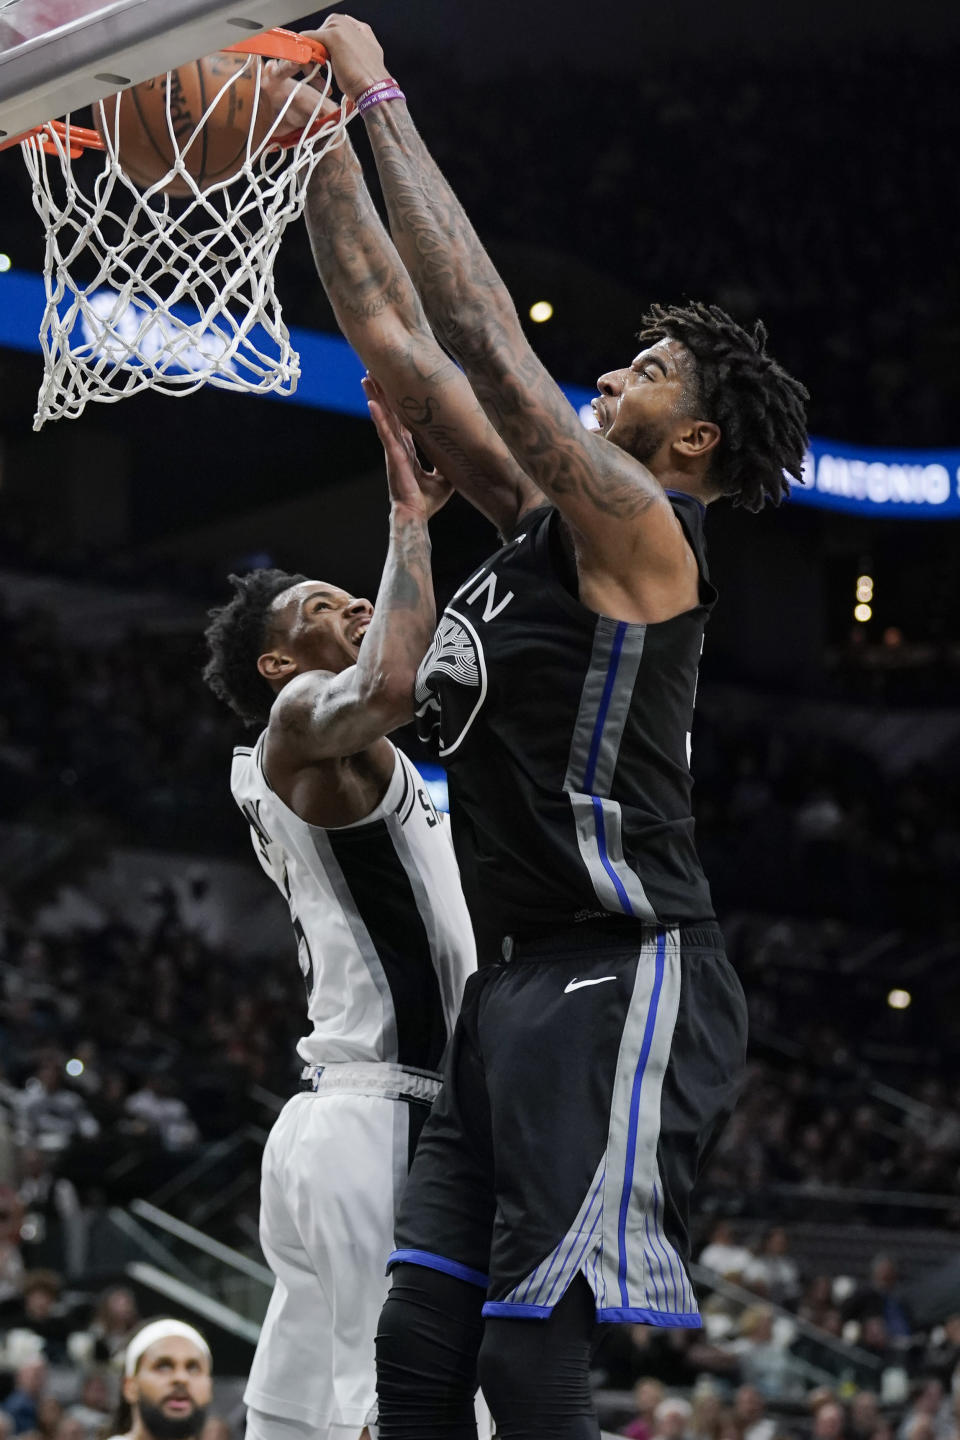 Golden State Warriors' Marquese Chriss, right, dunks against San Antonio Spurs' Dejounte Murray during the first half of an NBA basketball game, Tuesday, Dec. 31, 2019, in San Antonio. (AP Photo/Darren Abate)